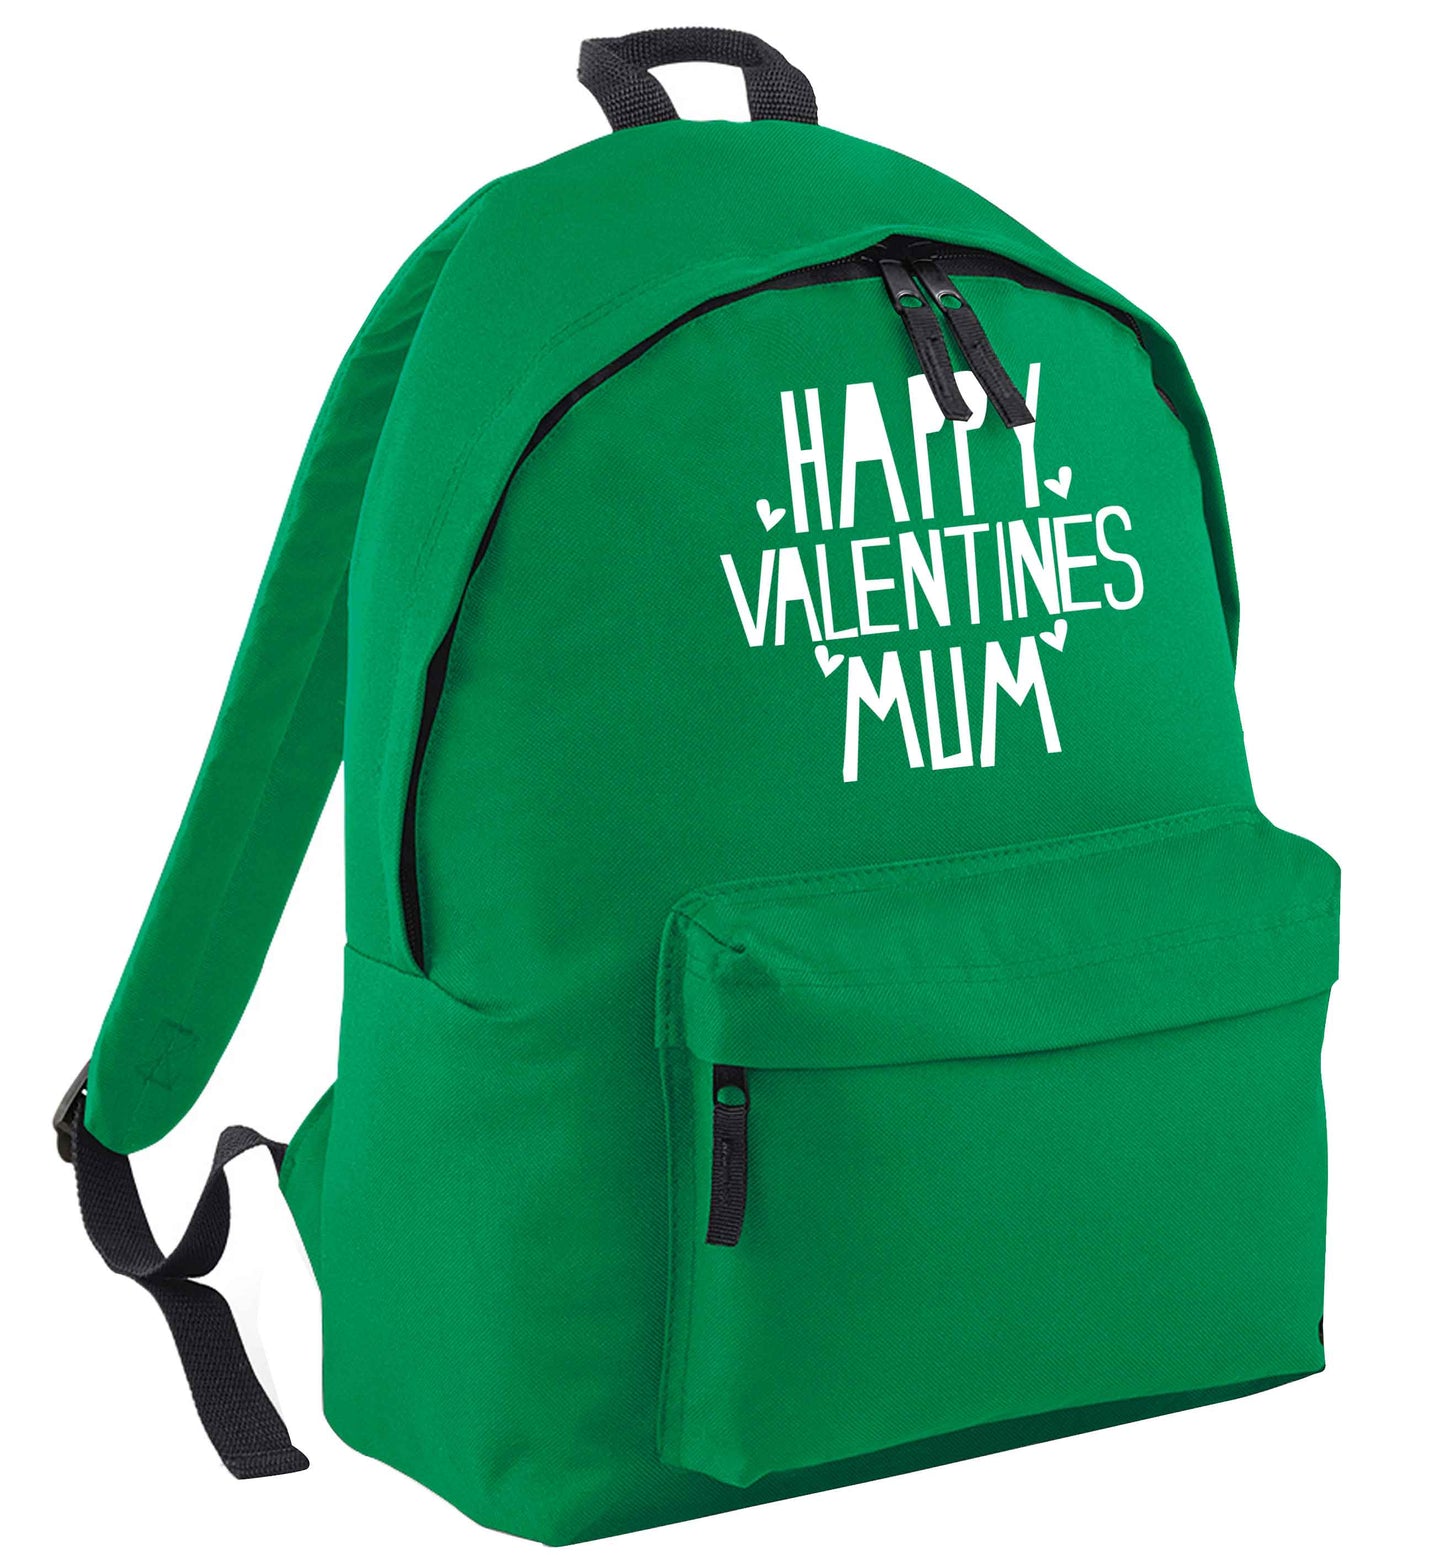 Happy valentines mum green adults backpack